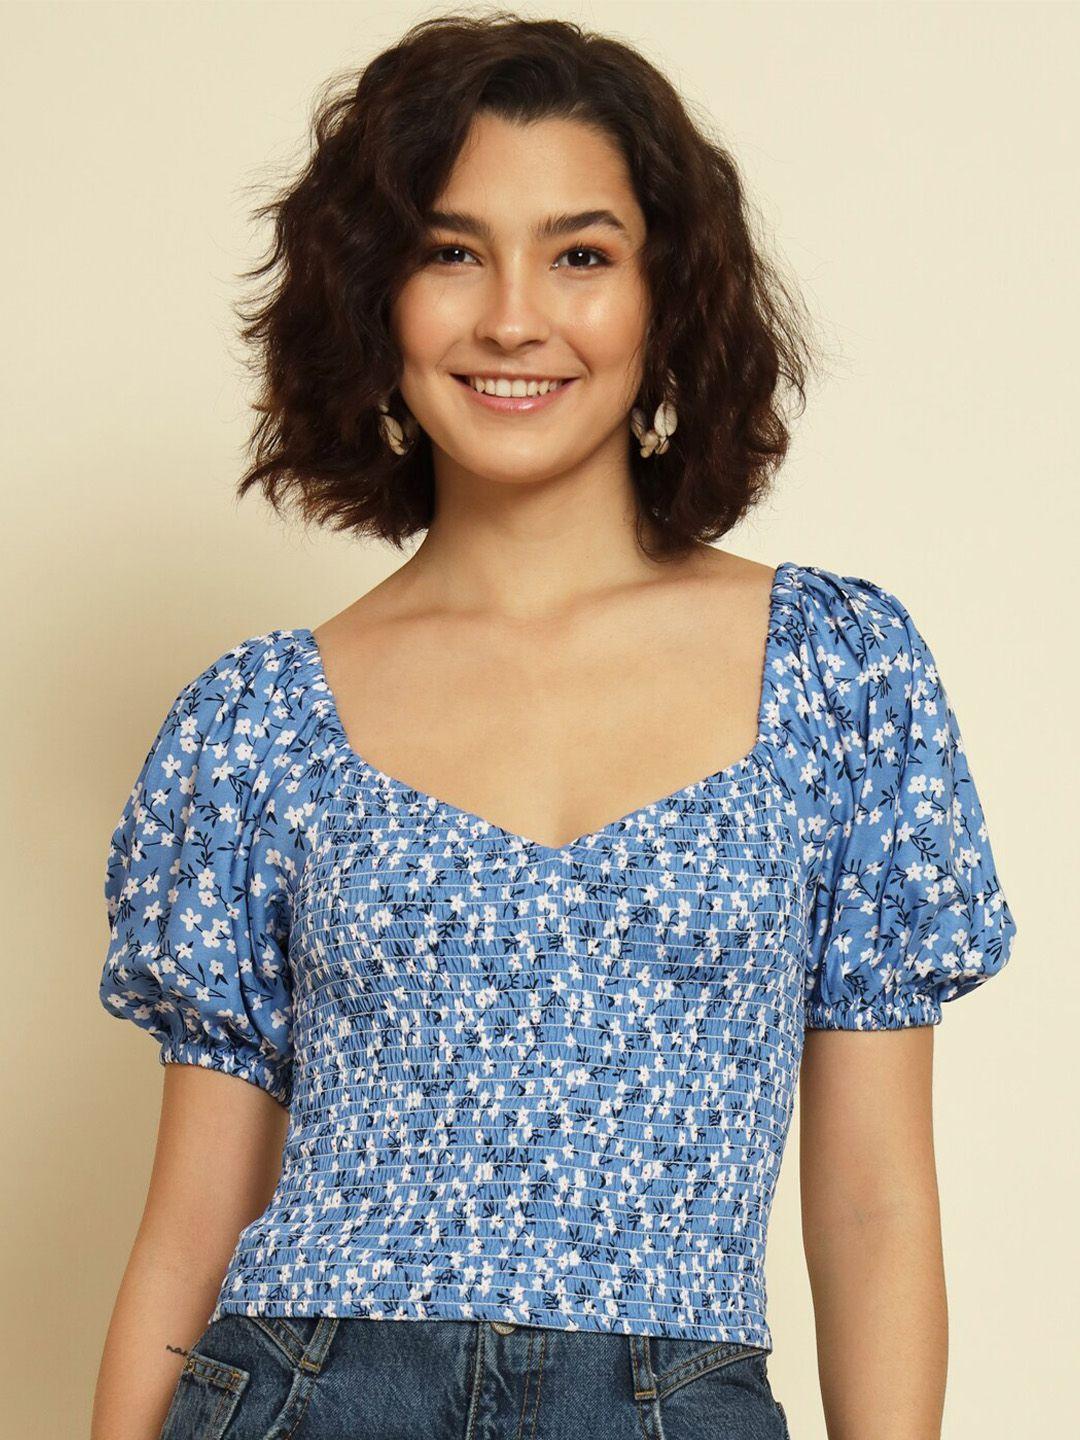 trend-arrest-blue-floral-print-puff-sleeve-styled-back-top